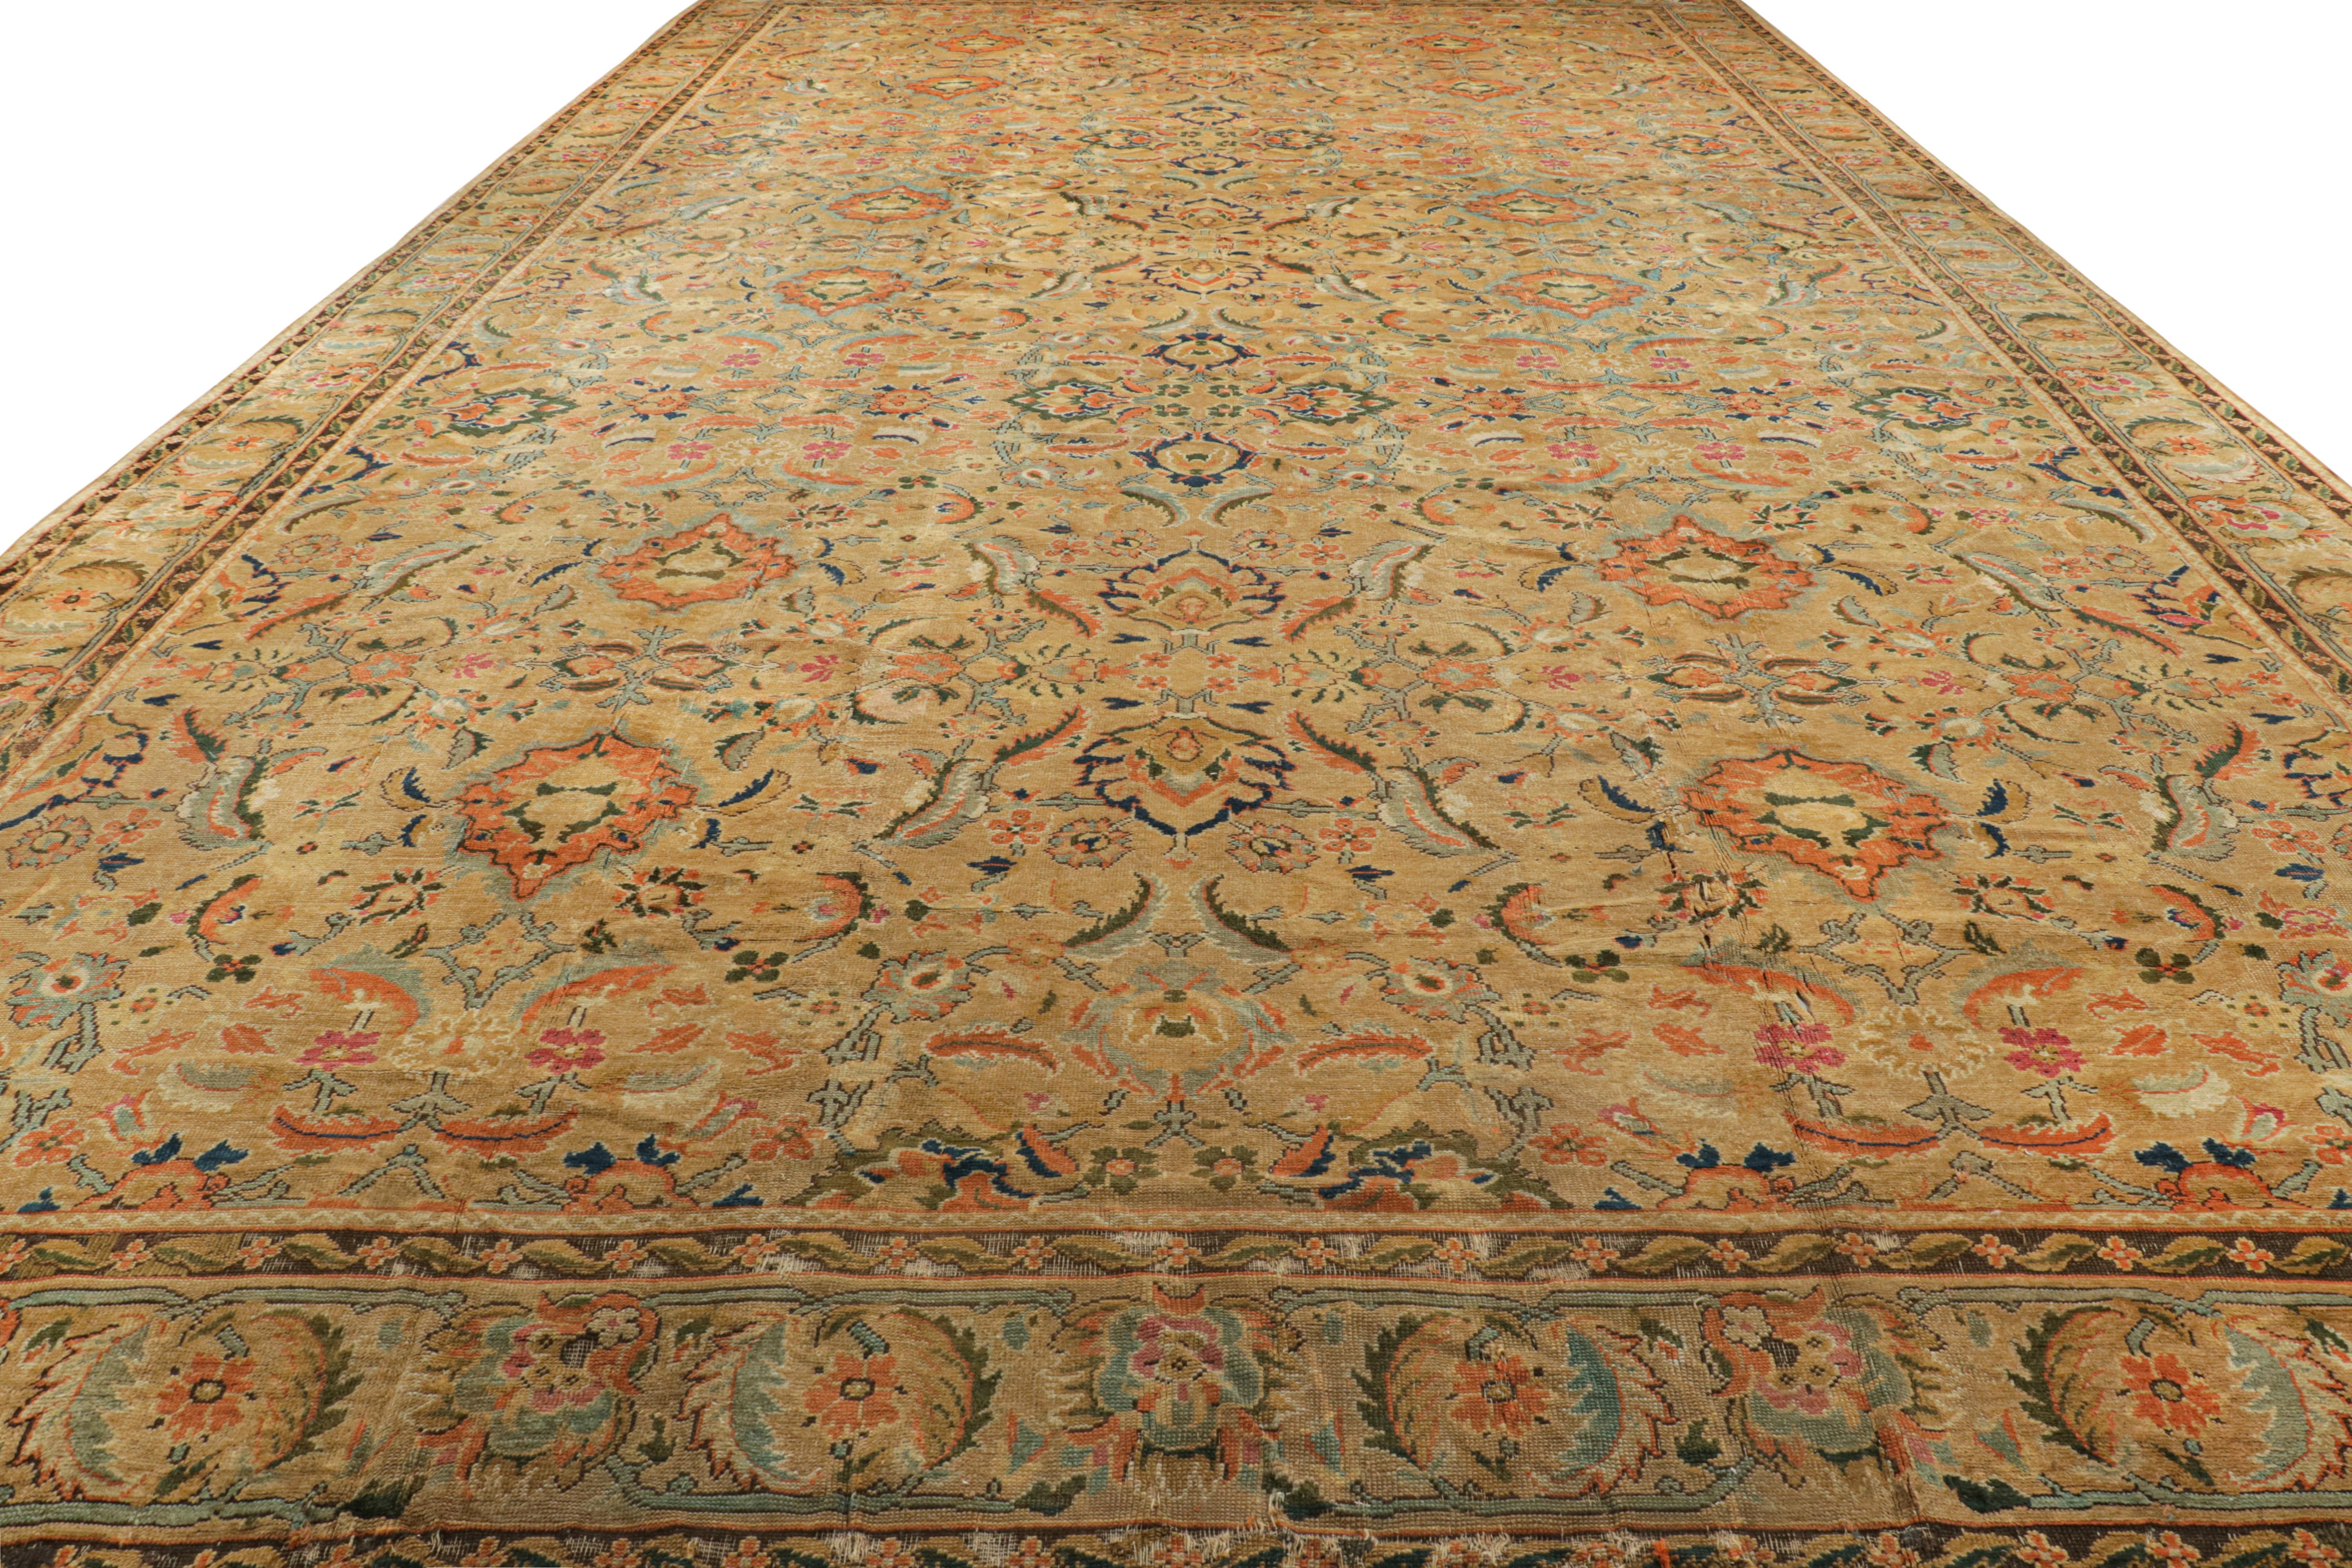 Oversized Antique Axminster Rug in Camel with Floral Patterns In Good Condition For Sale In Long Island City, NY